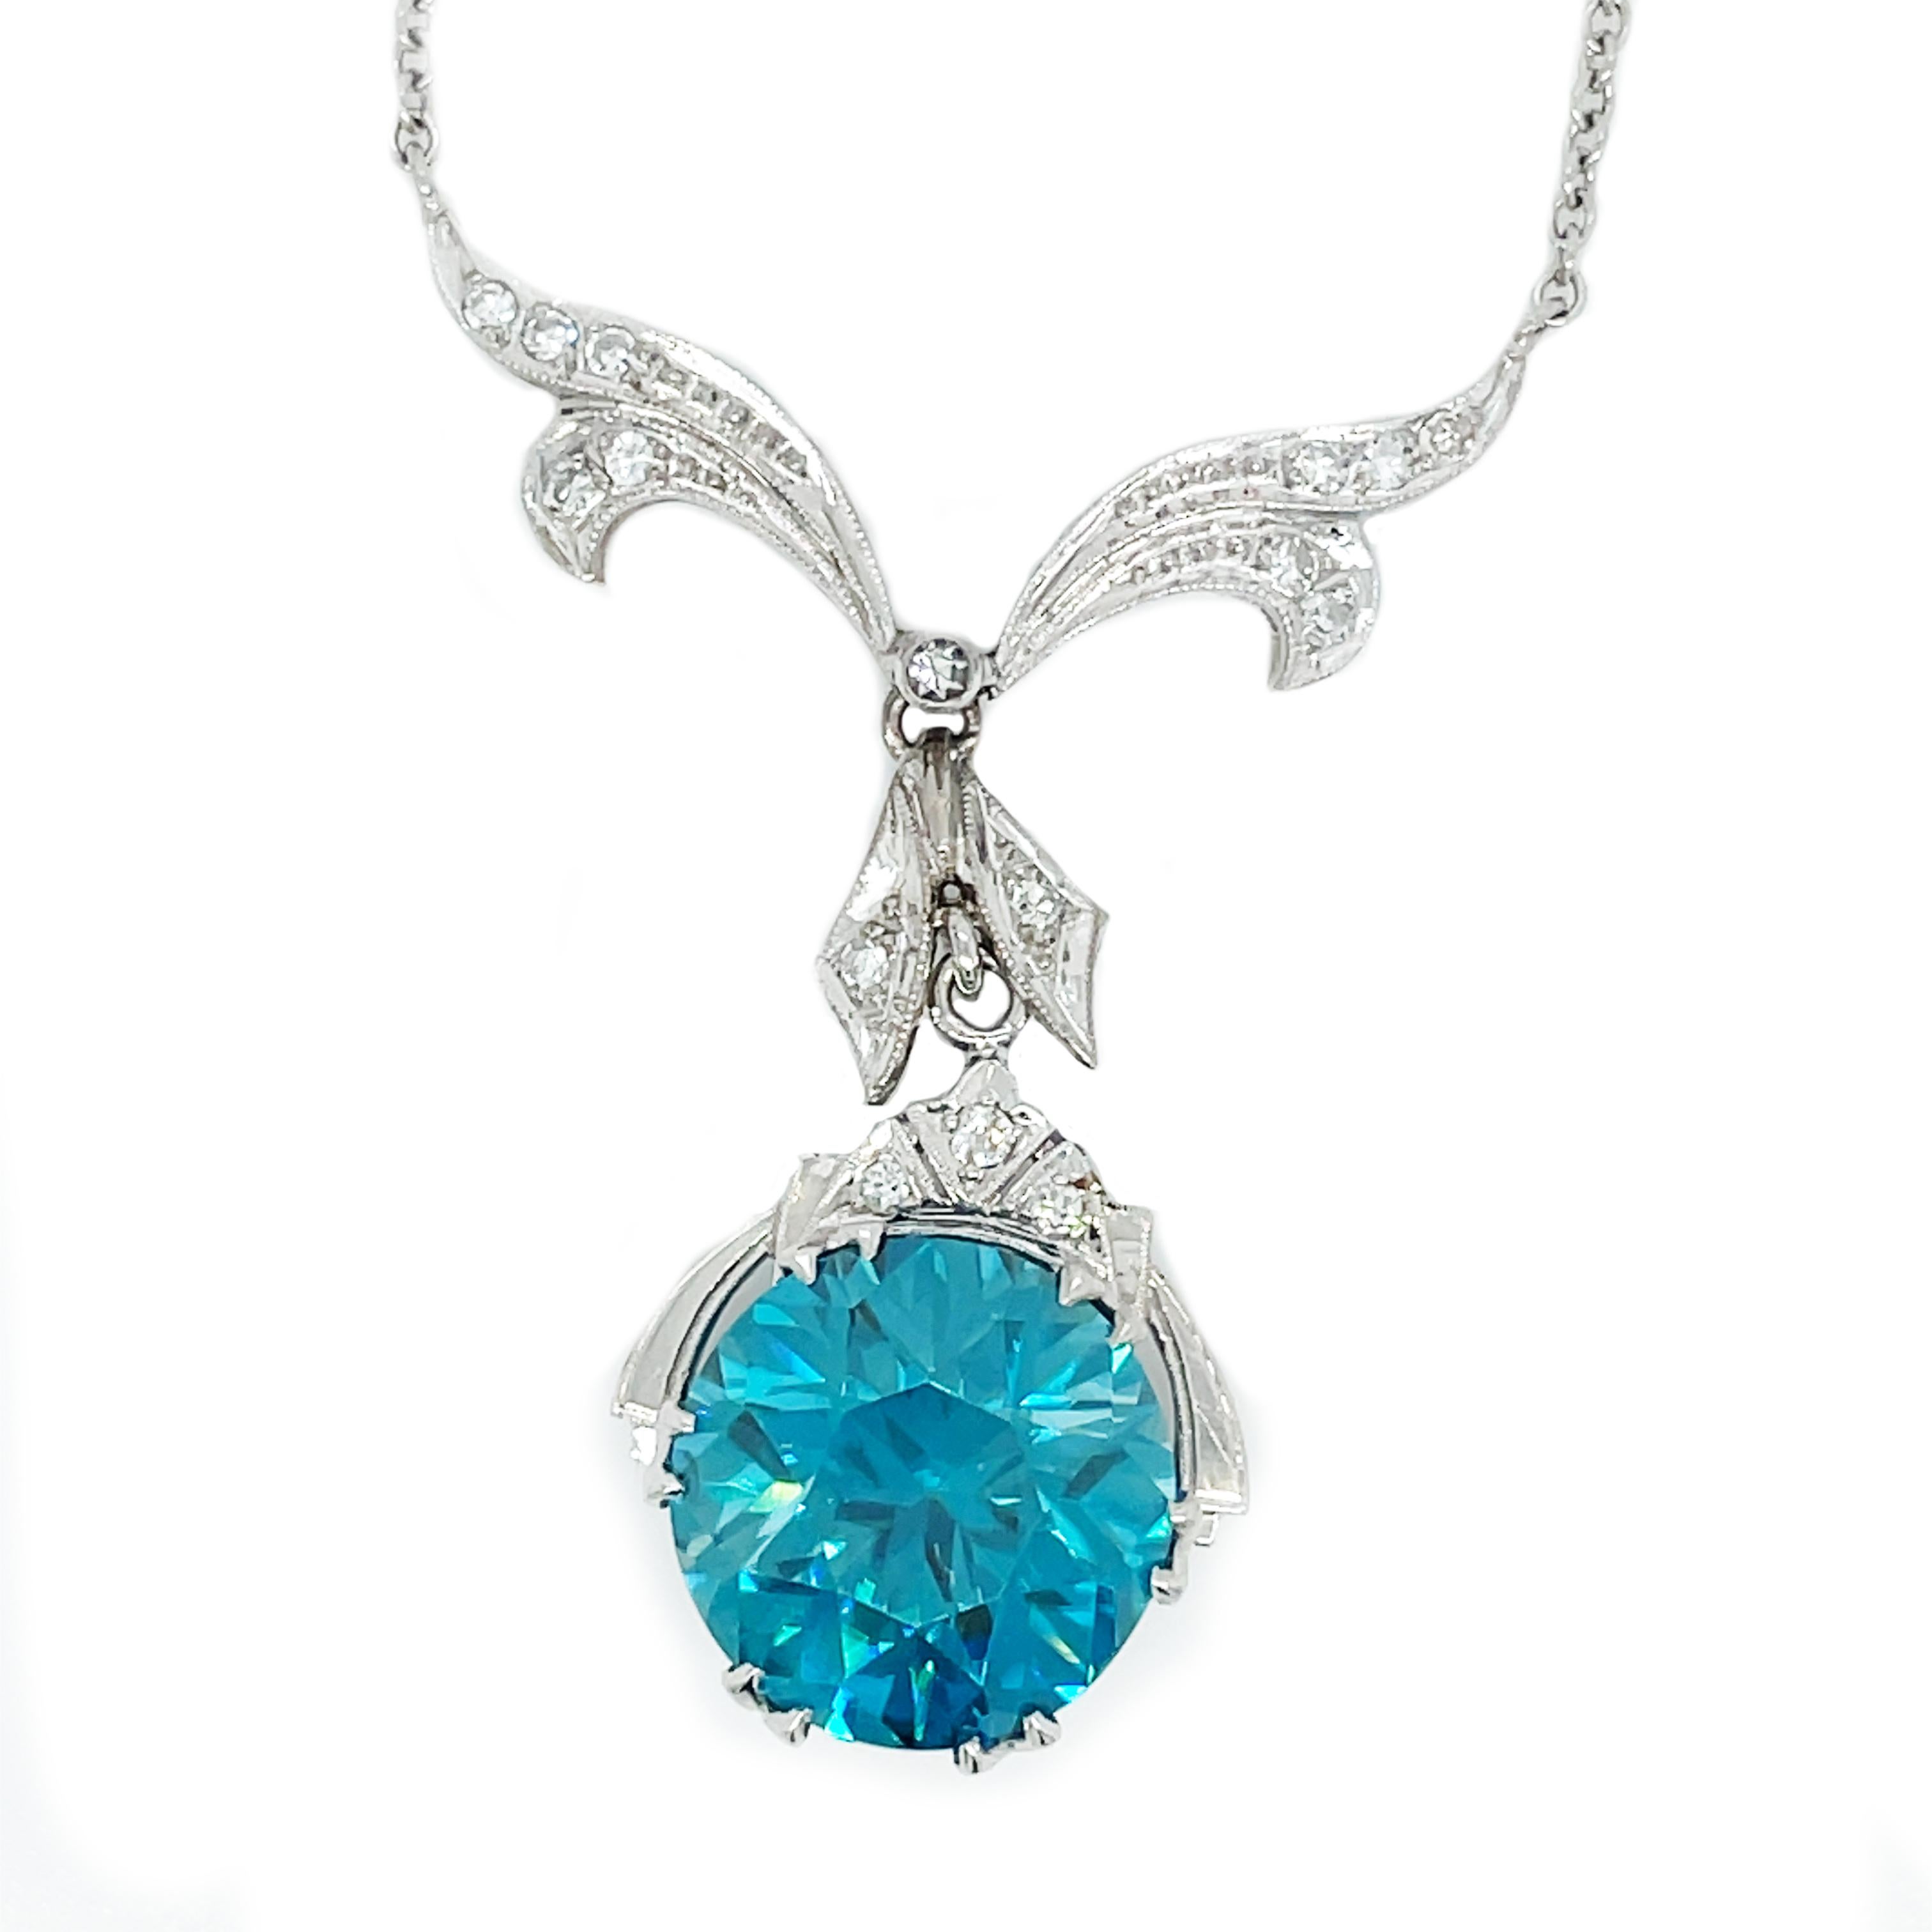 This is a killer Art Deco necklace that features a spectacular genuine Blue Zircon tied together with a gorgeous diamond-studded bow set in Platinum! This utterly delightful jewel will knock you off your feet! A gorgeous and impressive round zircon,